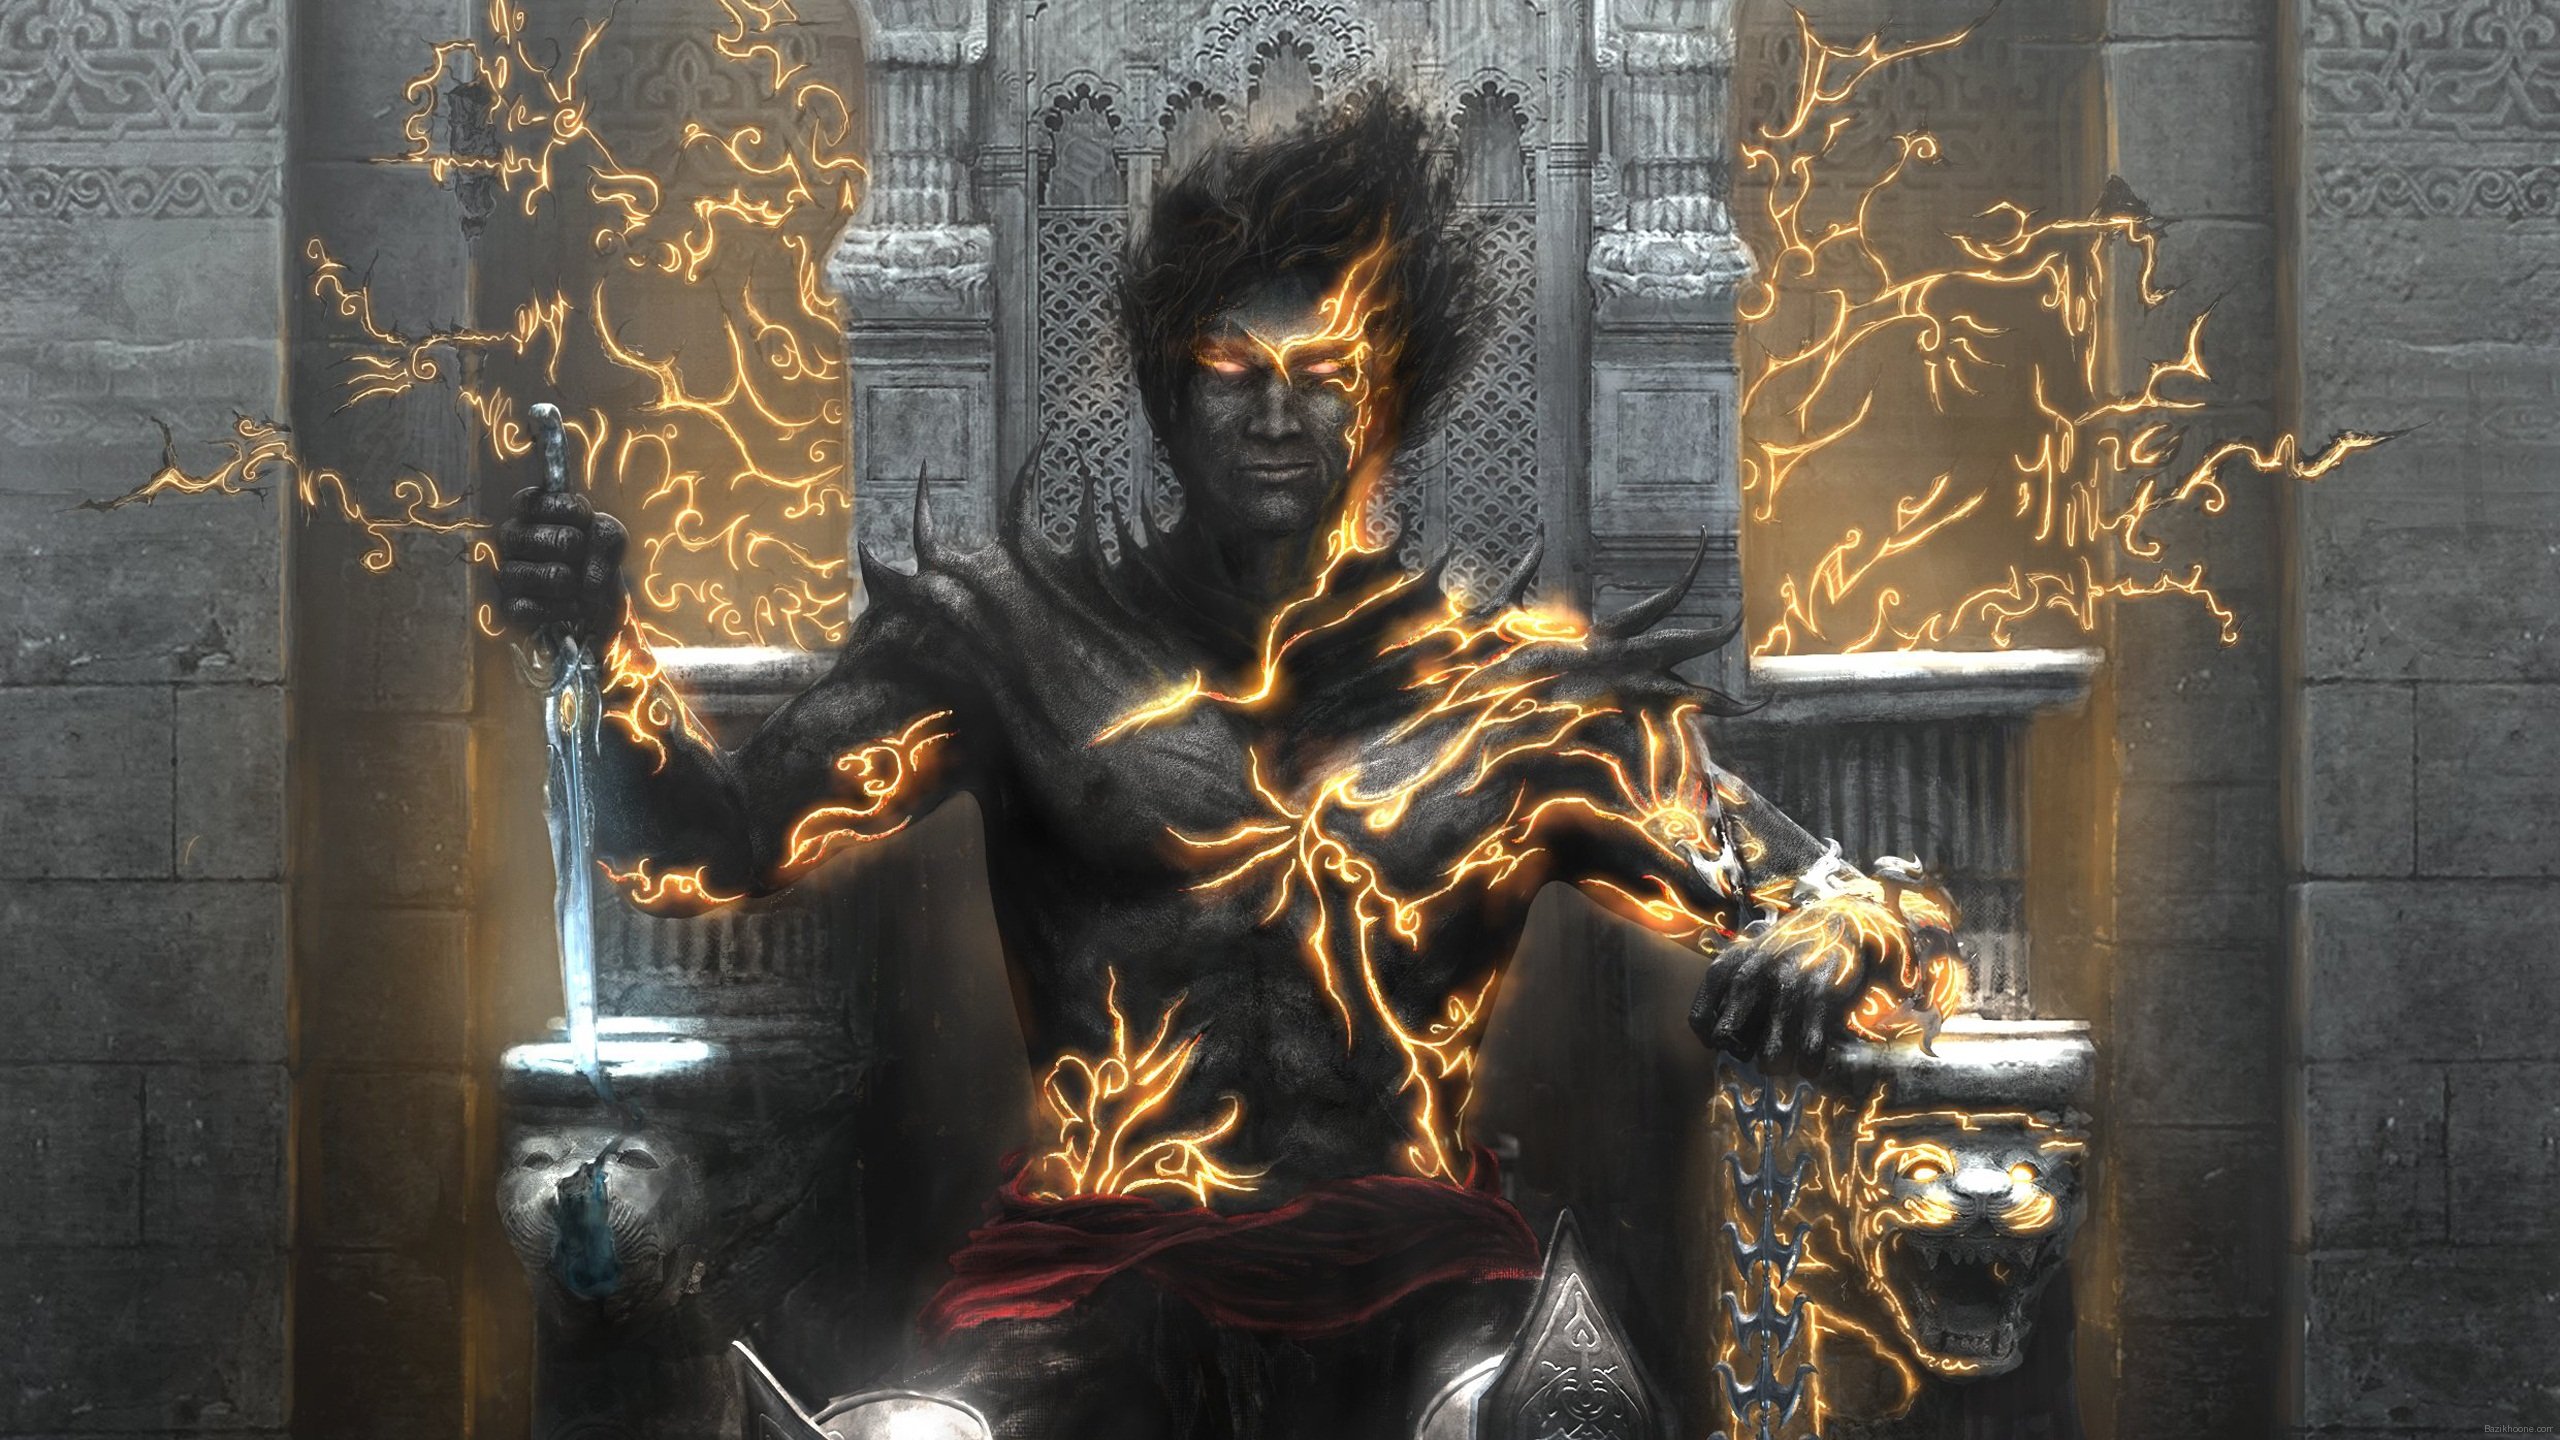 Dark Prince (Prince of Persia The Two Thrones) by GiddianiR on DeviantArt